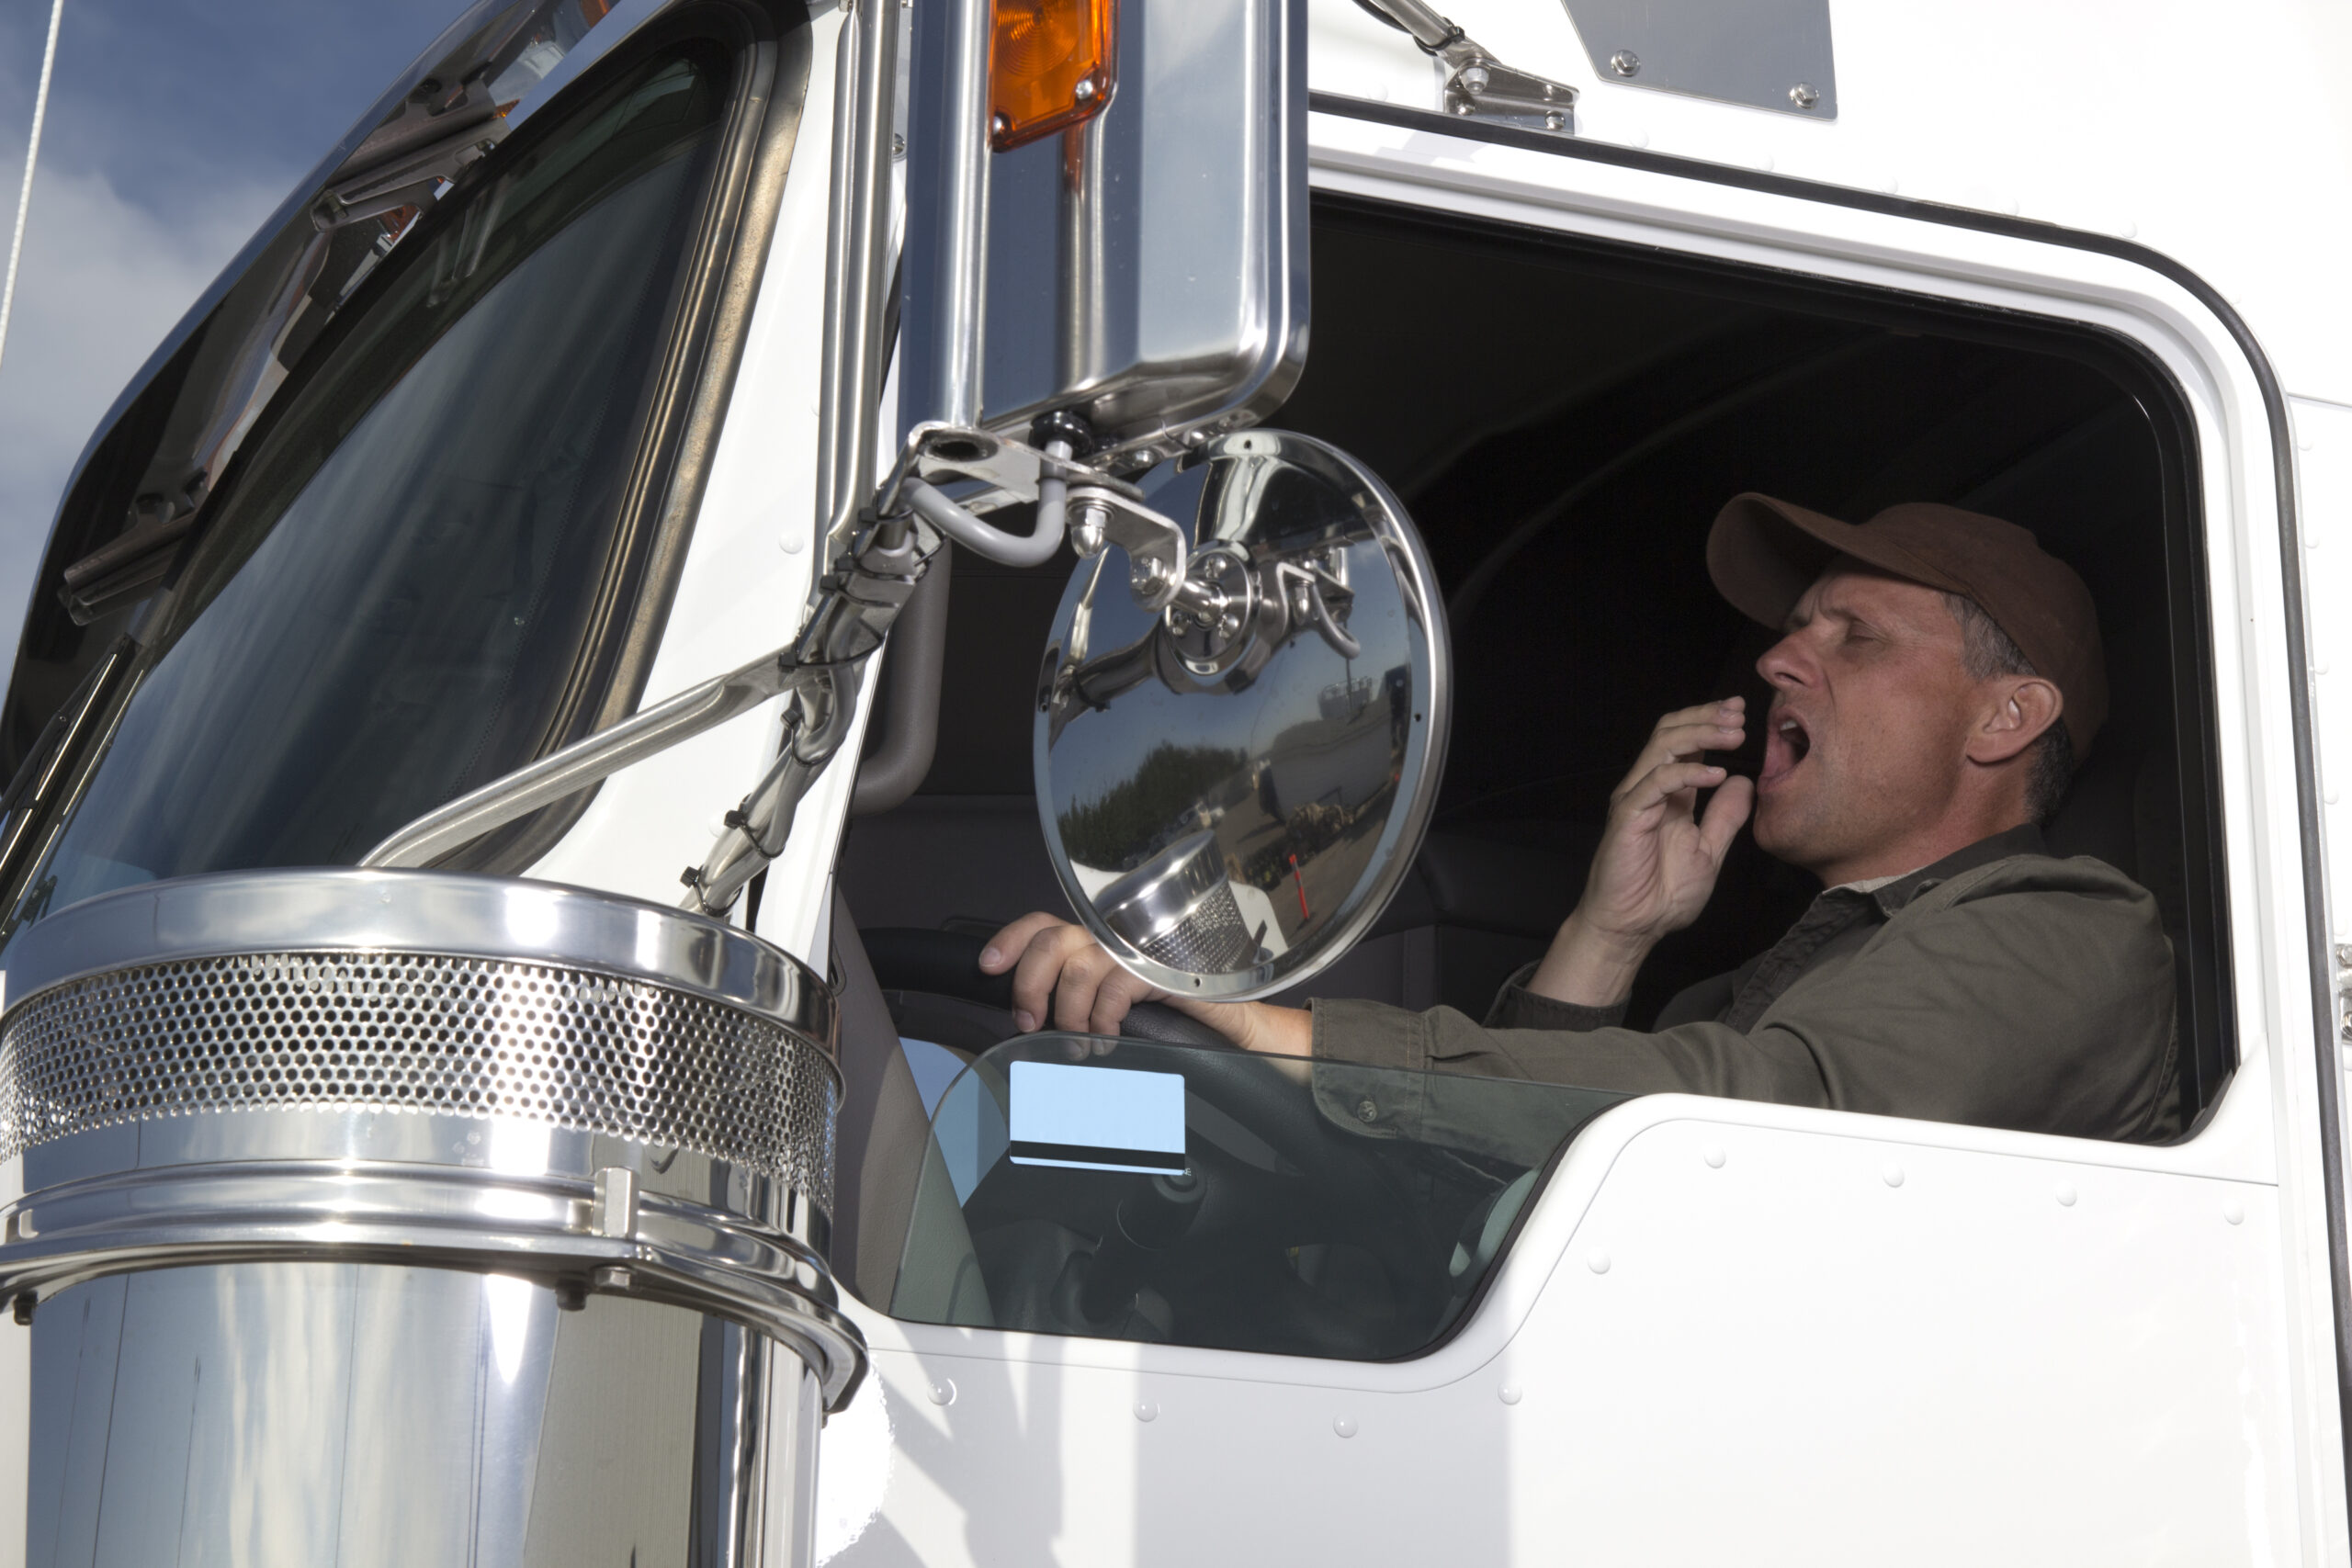 A truck driver yawns while driving.